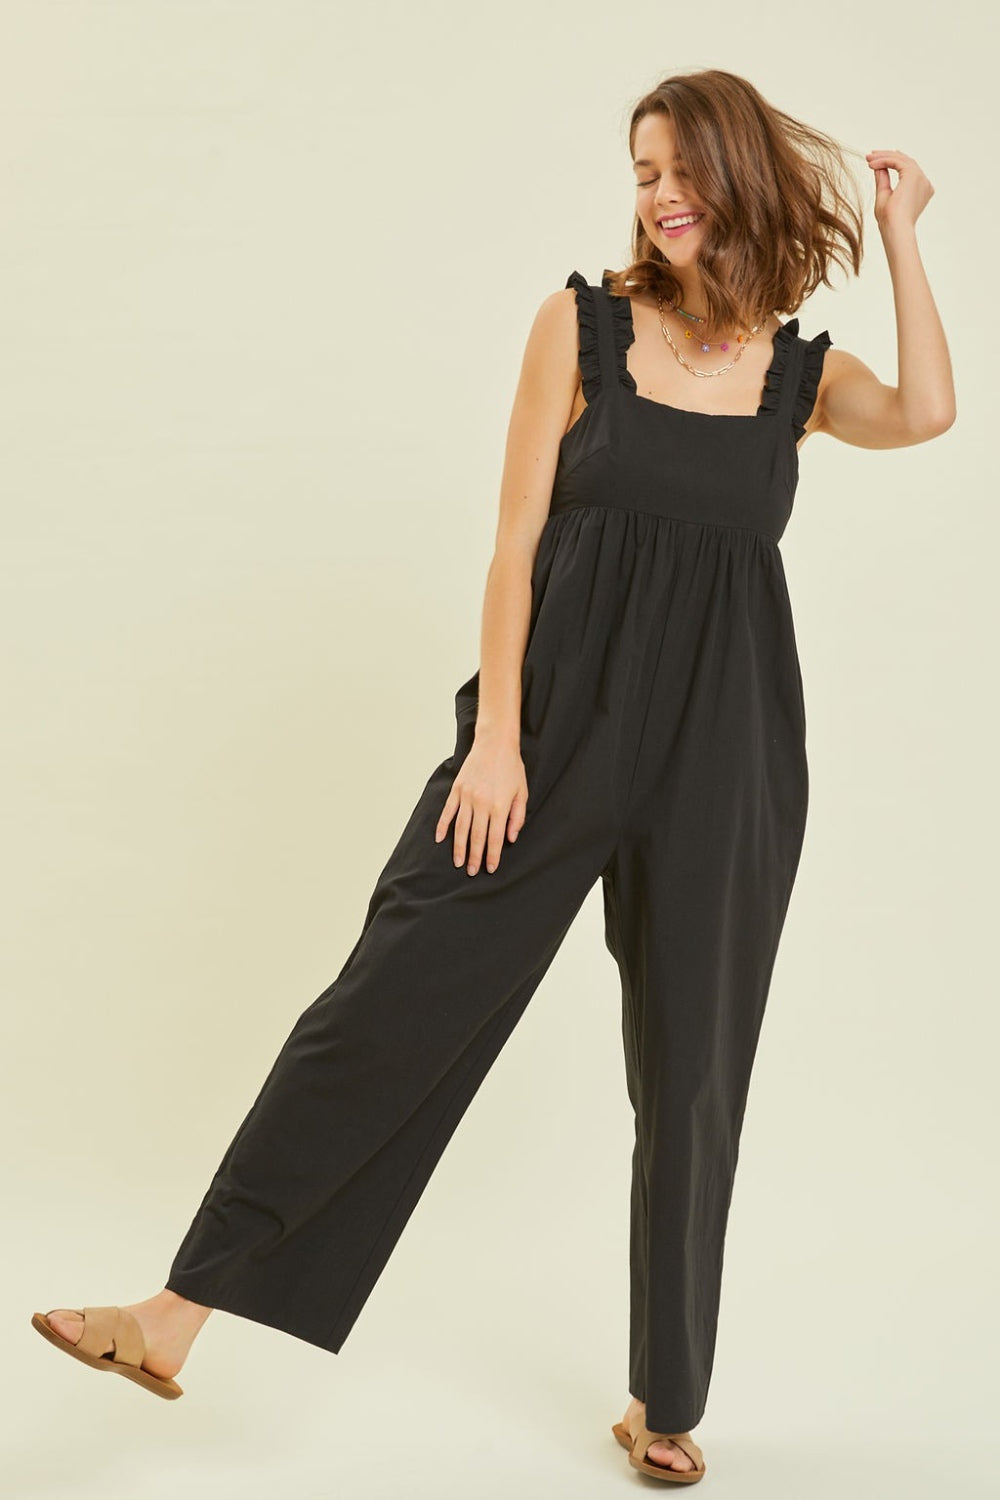 Ruffled Strap Back Tie Wide Leg Jumpsuit - All Sizes